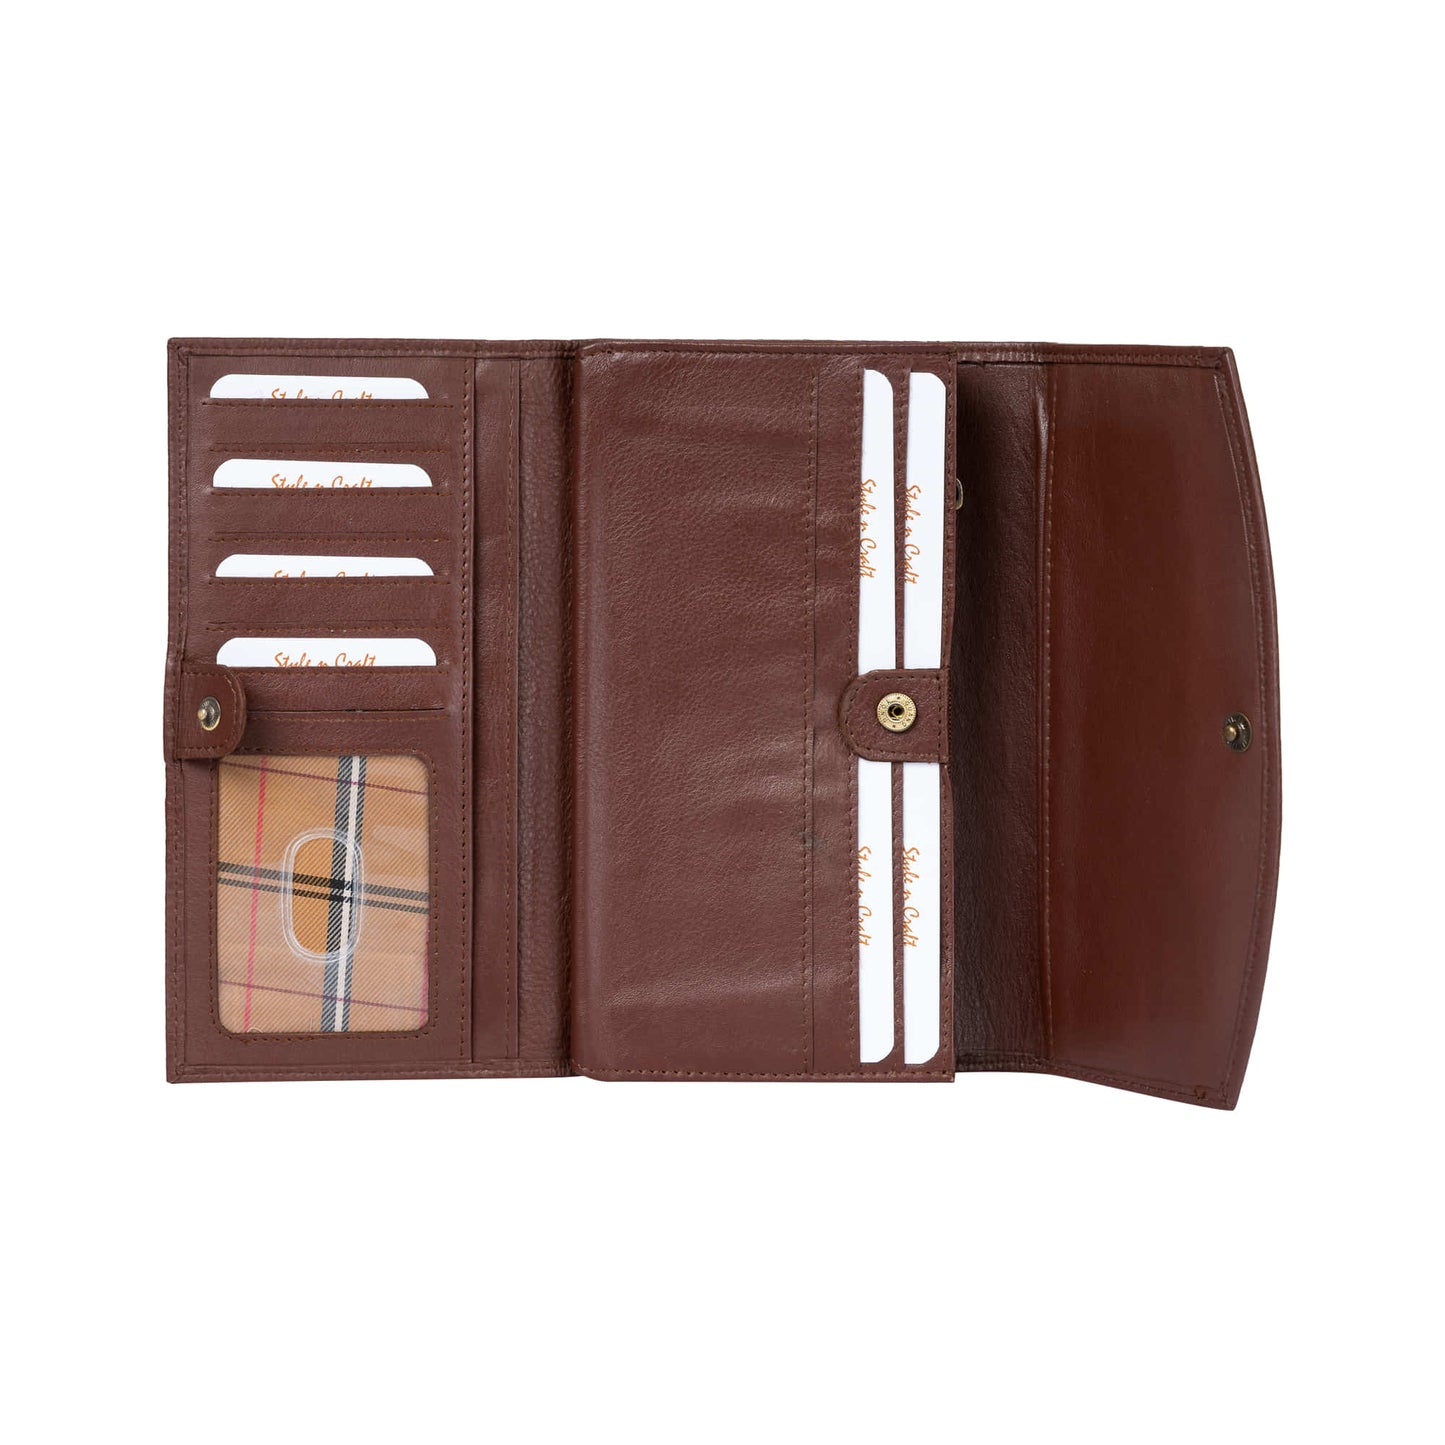 Style n Craft 391105 Double Fold Ladies Long Clutch Wallet in High Grade Brown Full Grain Leather - 1st Open View Showing the Credit Card Pockets, ID Window, Inside Long Pockets